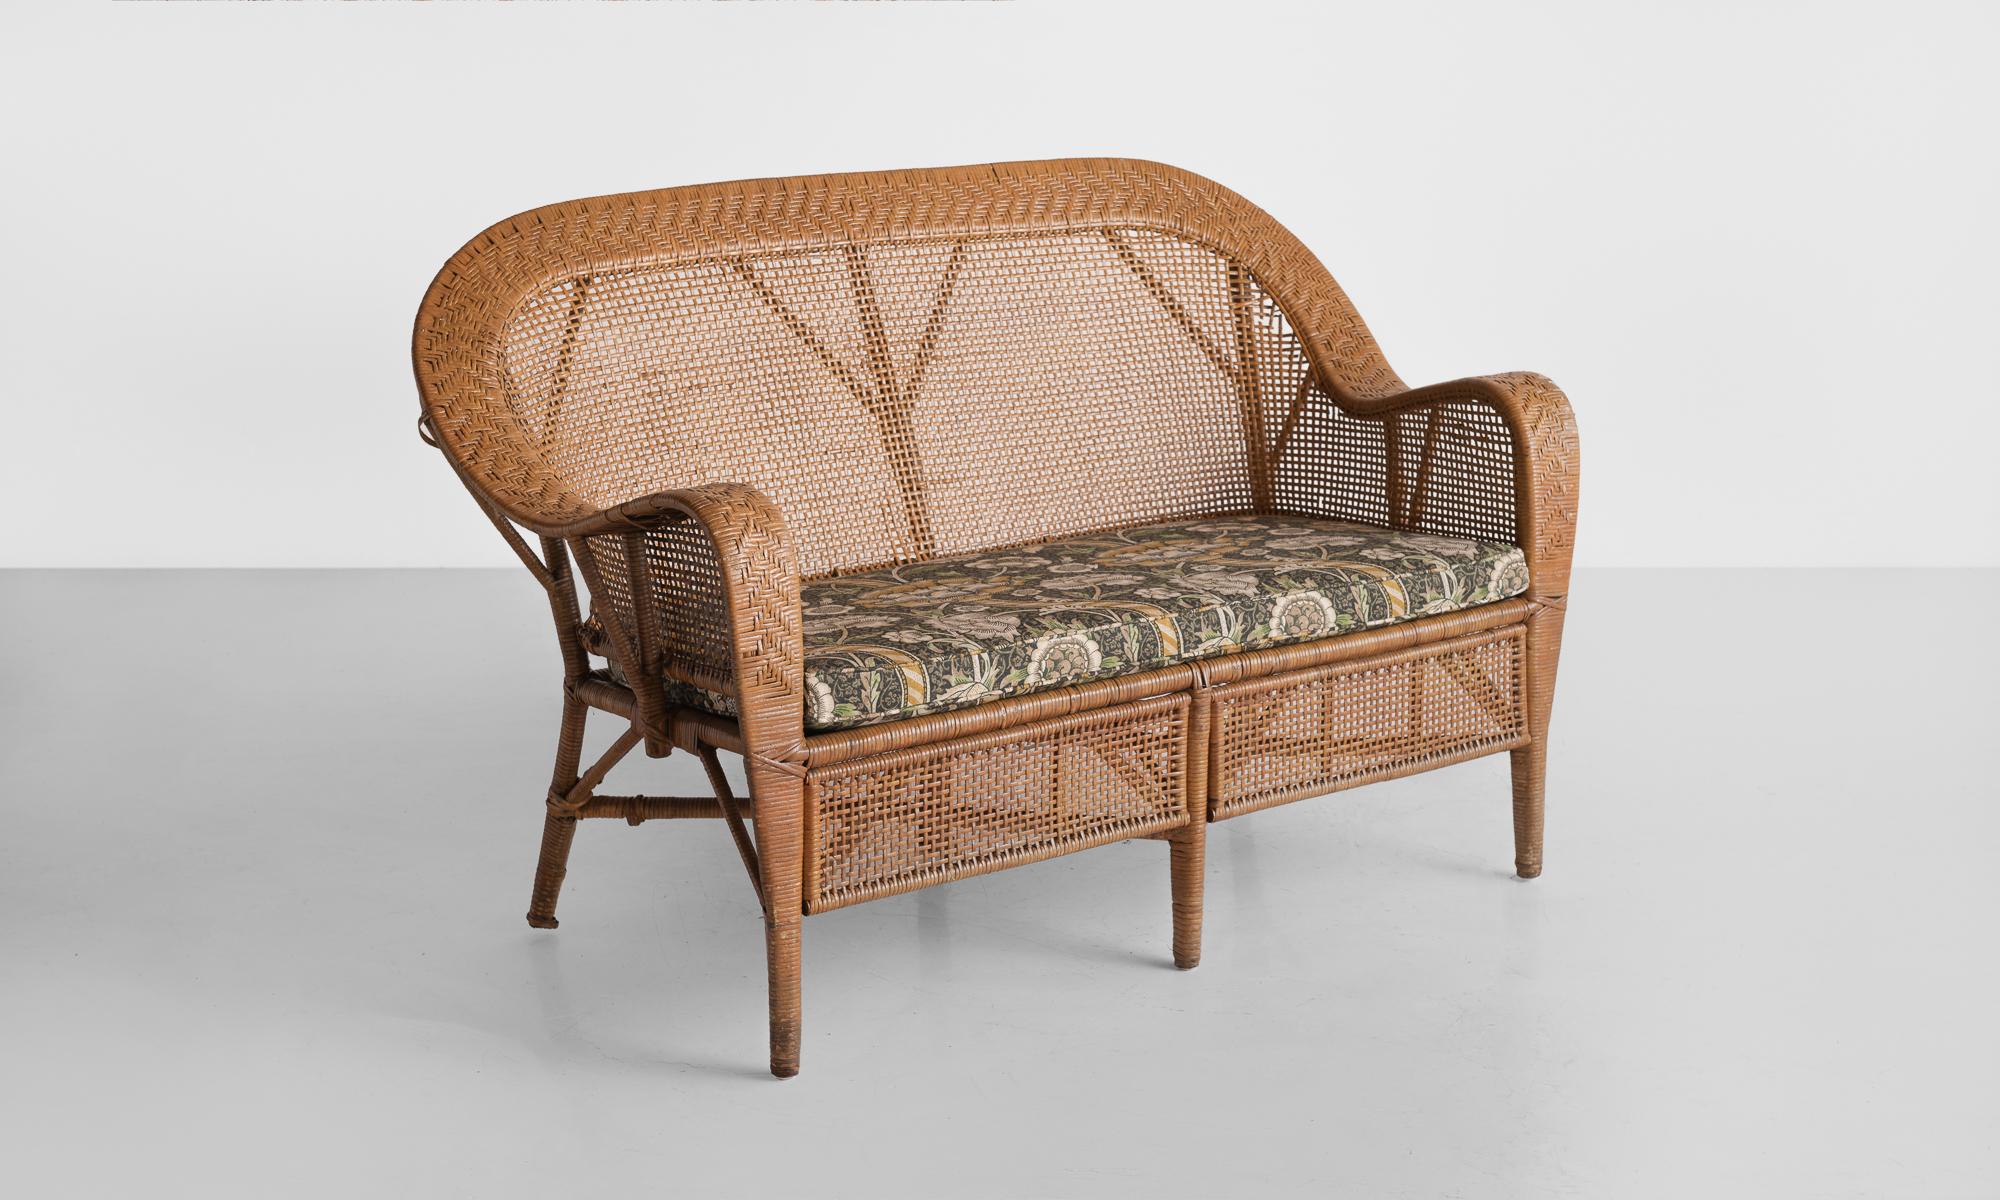 Wicket settee by Kay Fisker, circa 1950

Elegant form with ornate and varied weaving throughout, designed by Danish architect Kay Fisker. Includes a newly reupholstered seat cushion in Morris & Co. fabric.